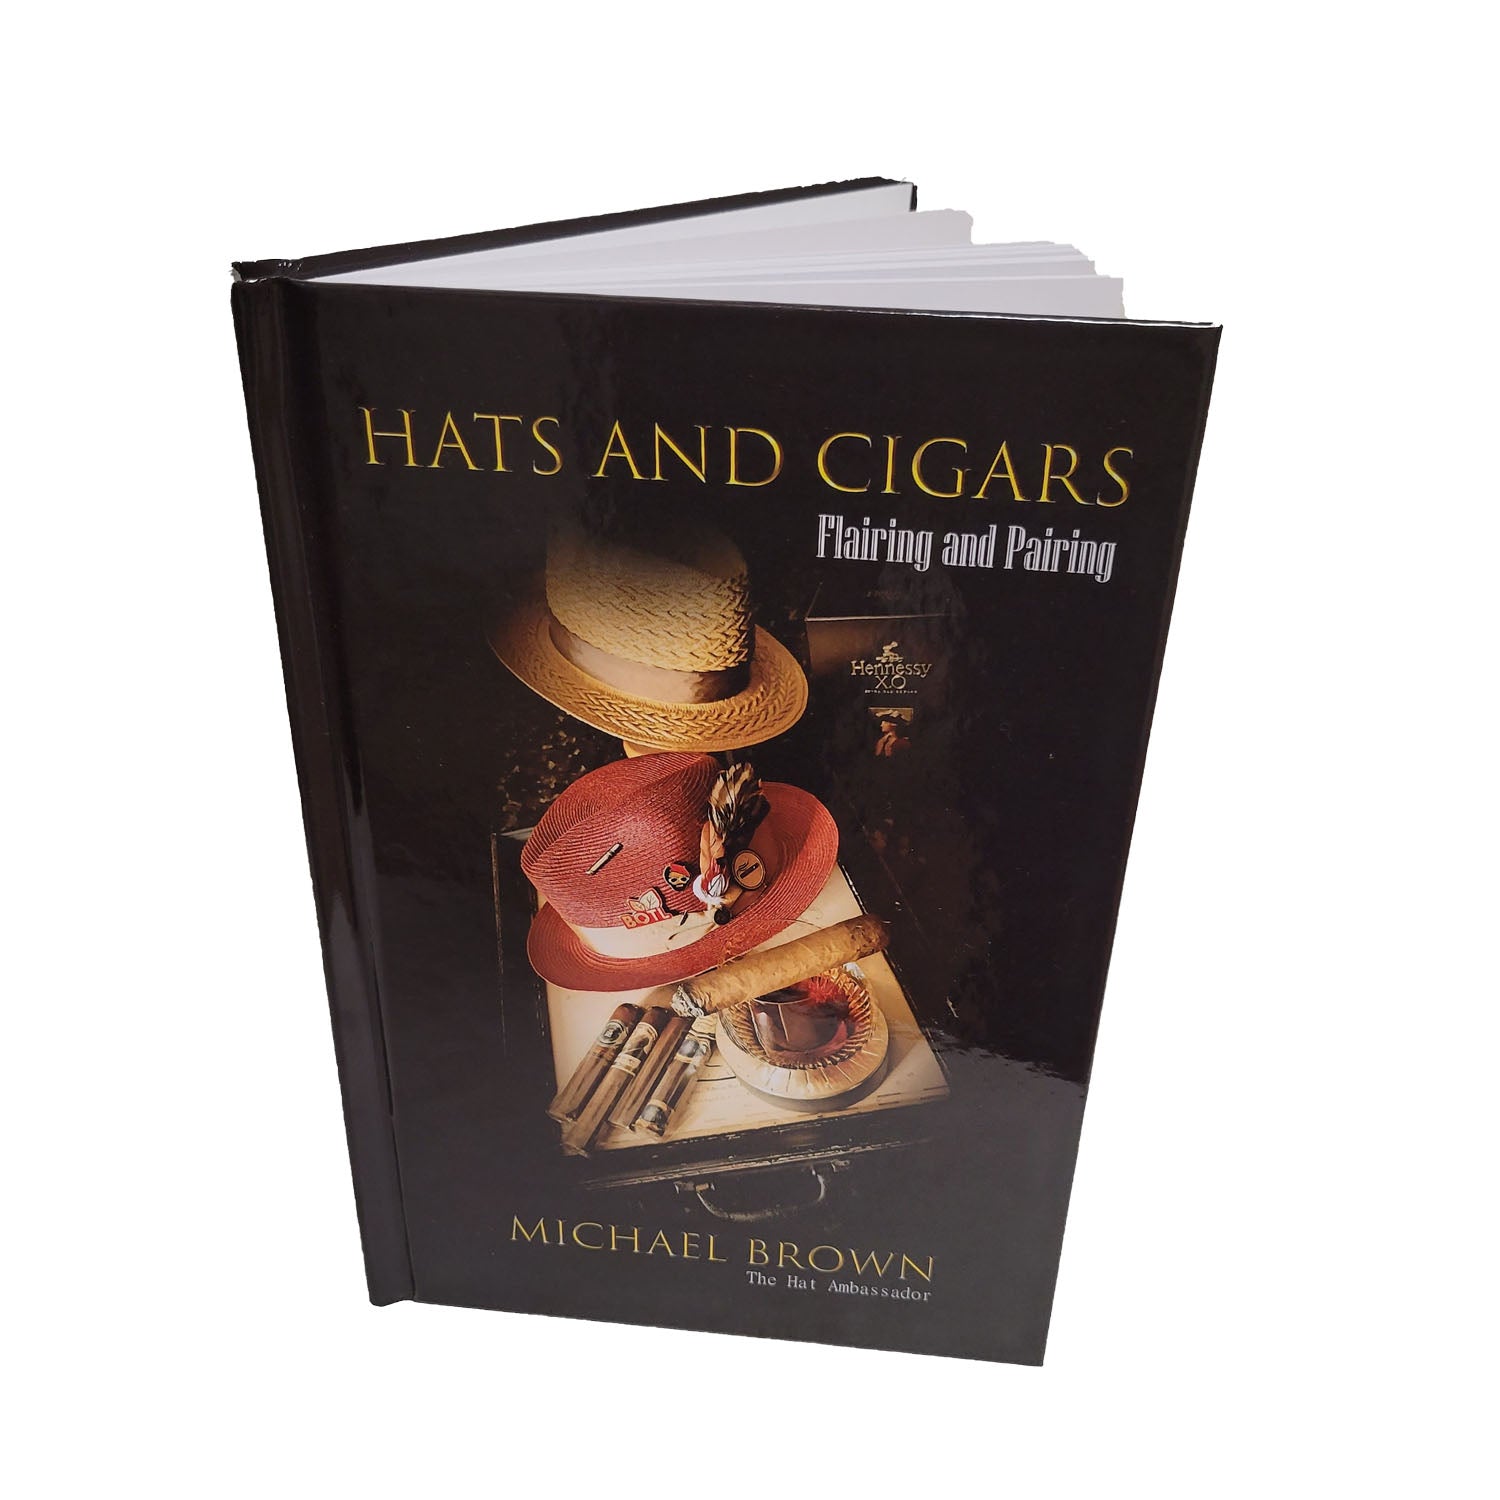 Hats and Cigars: Flairing and Pairing-Hard Cover